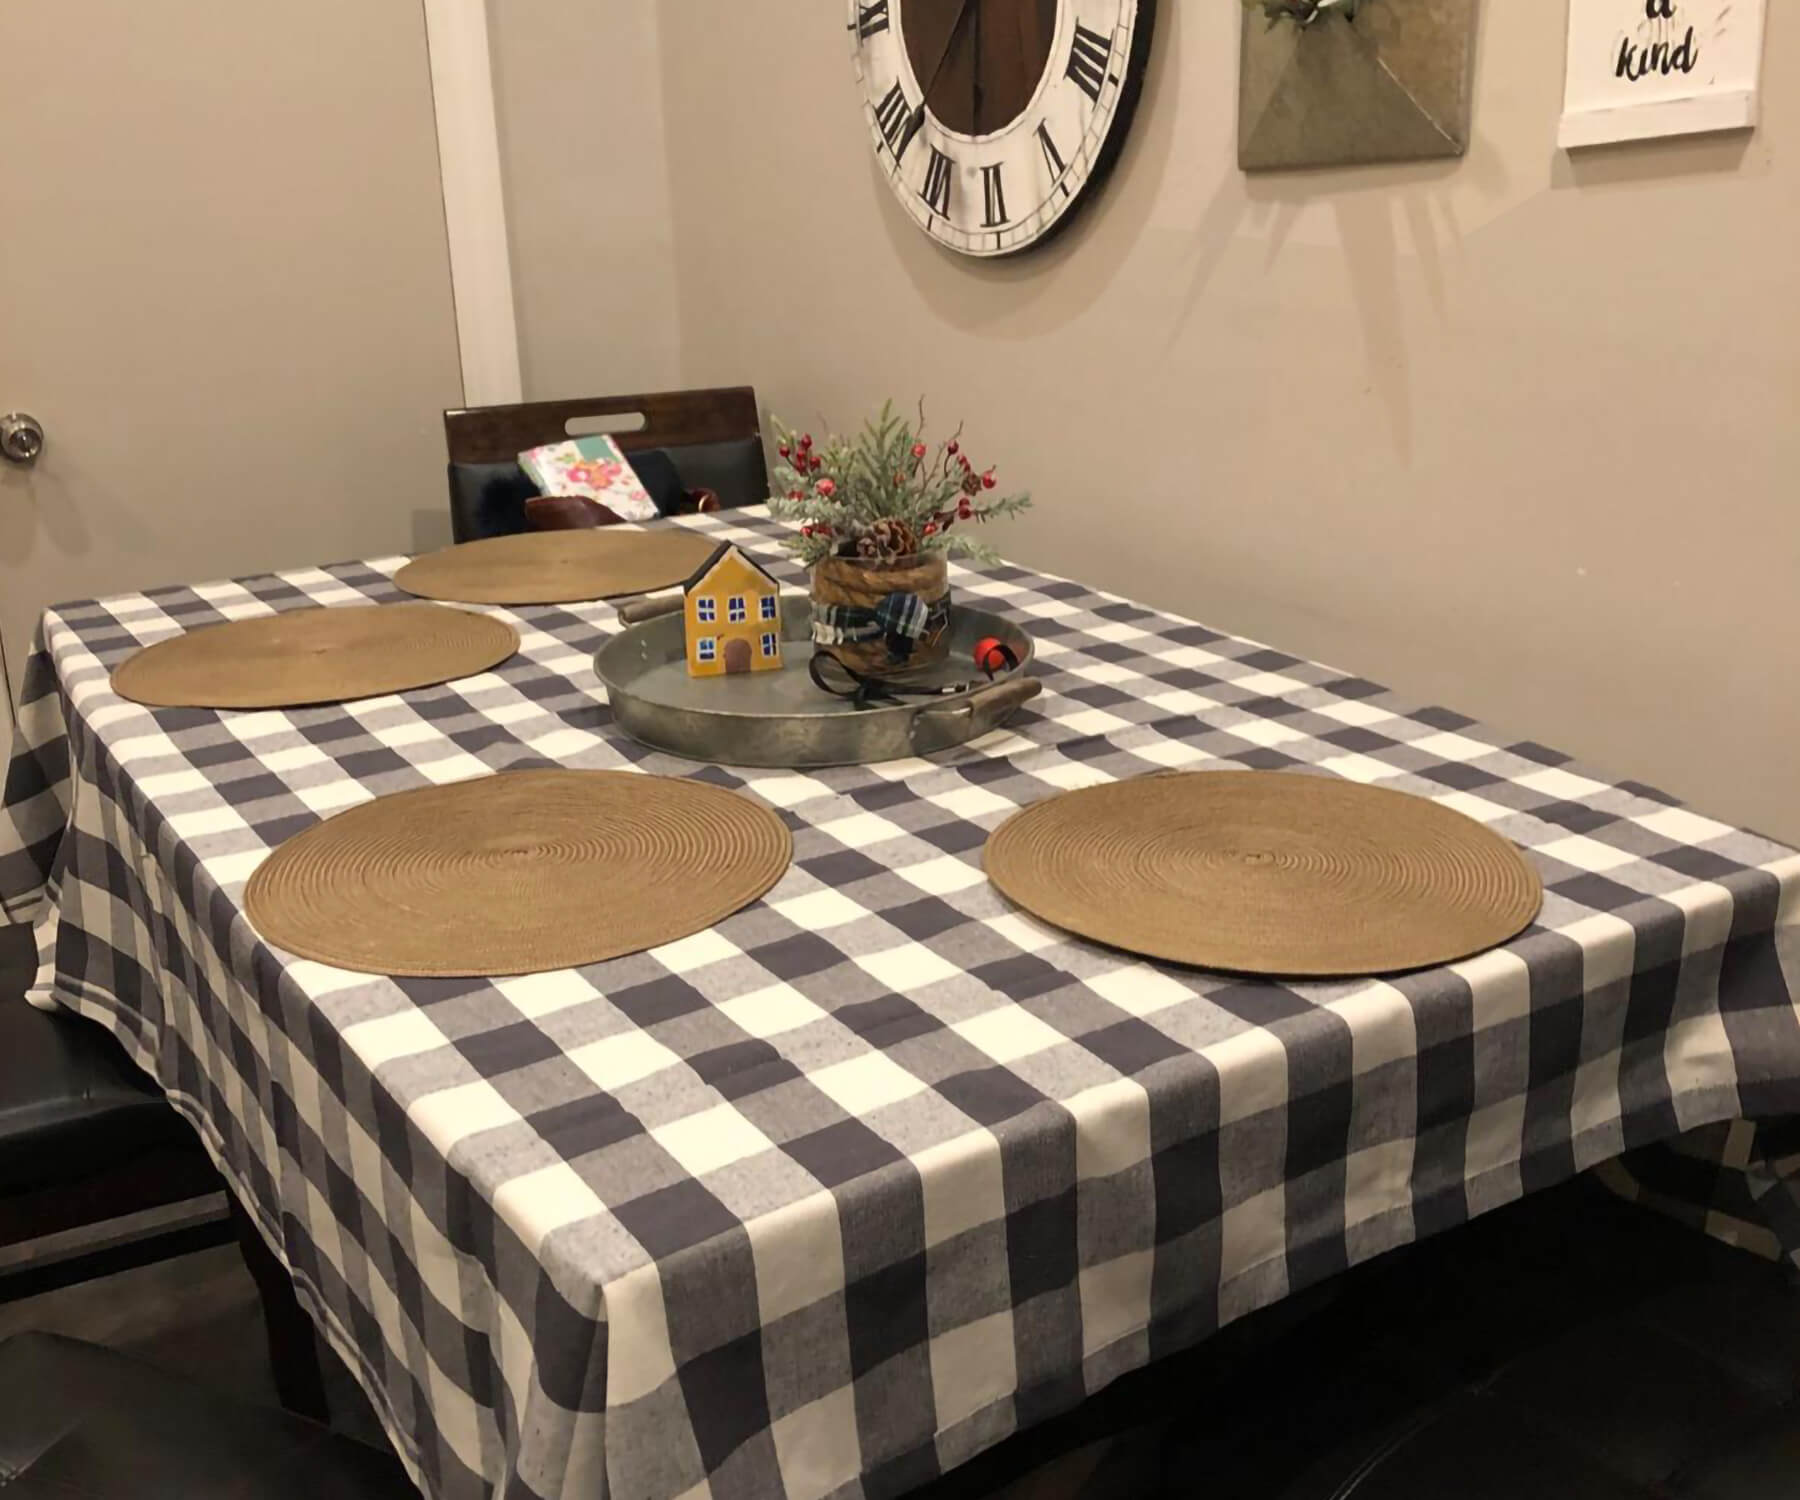 Buffalo plaid tablecloths add a nostalgic touch to picnics, rustic weddings, or any setting where a cozy, vintage feel is desired.